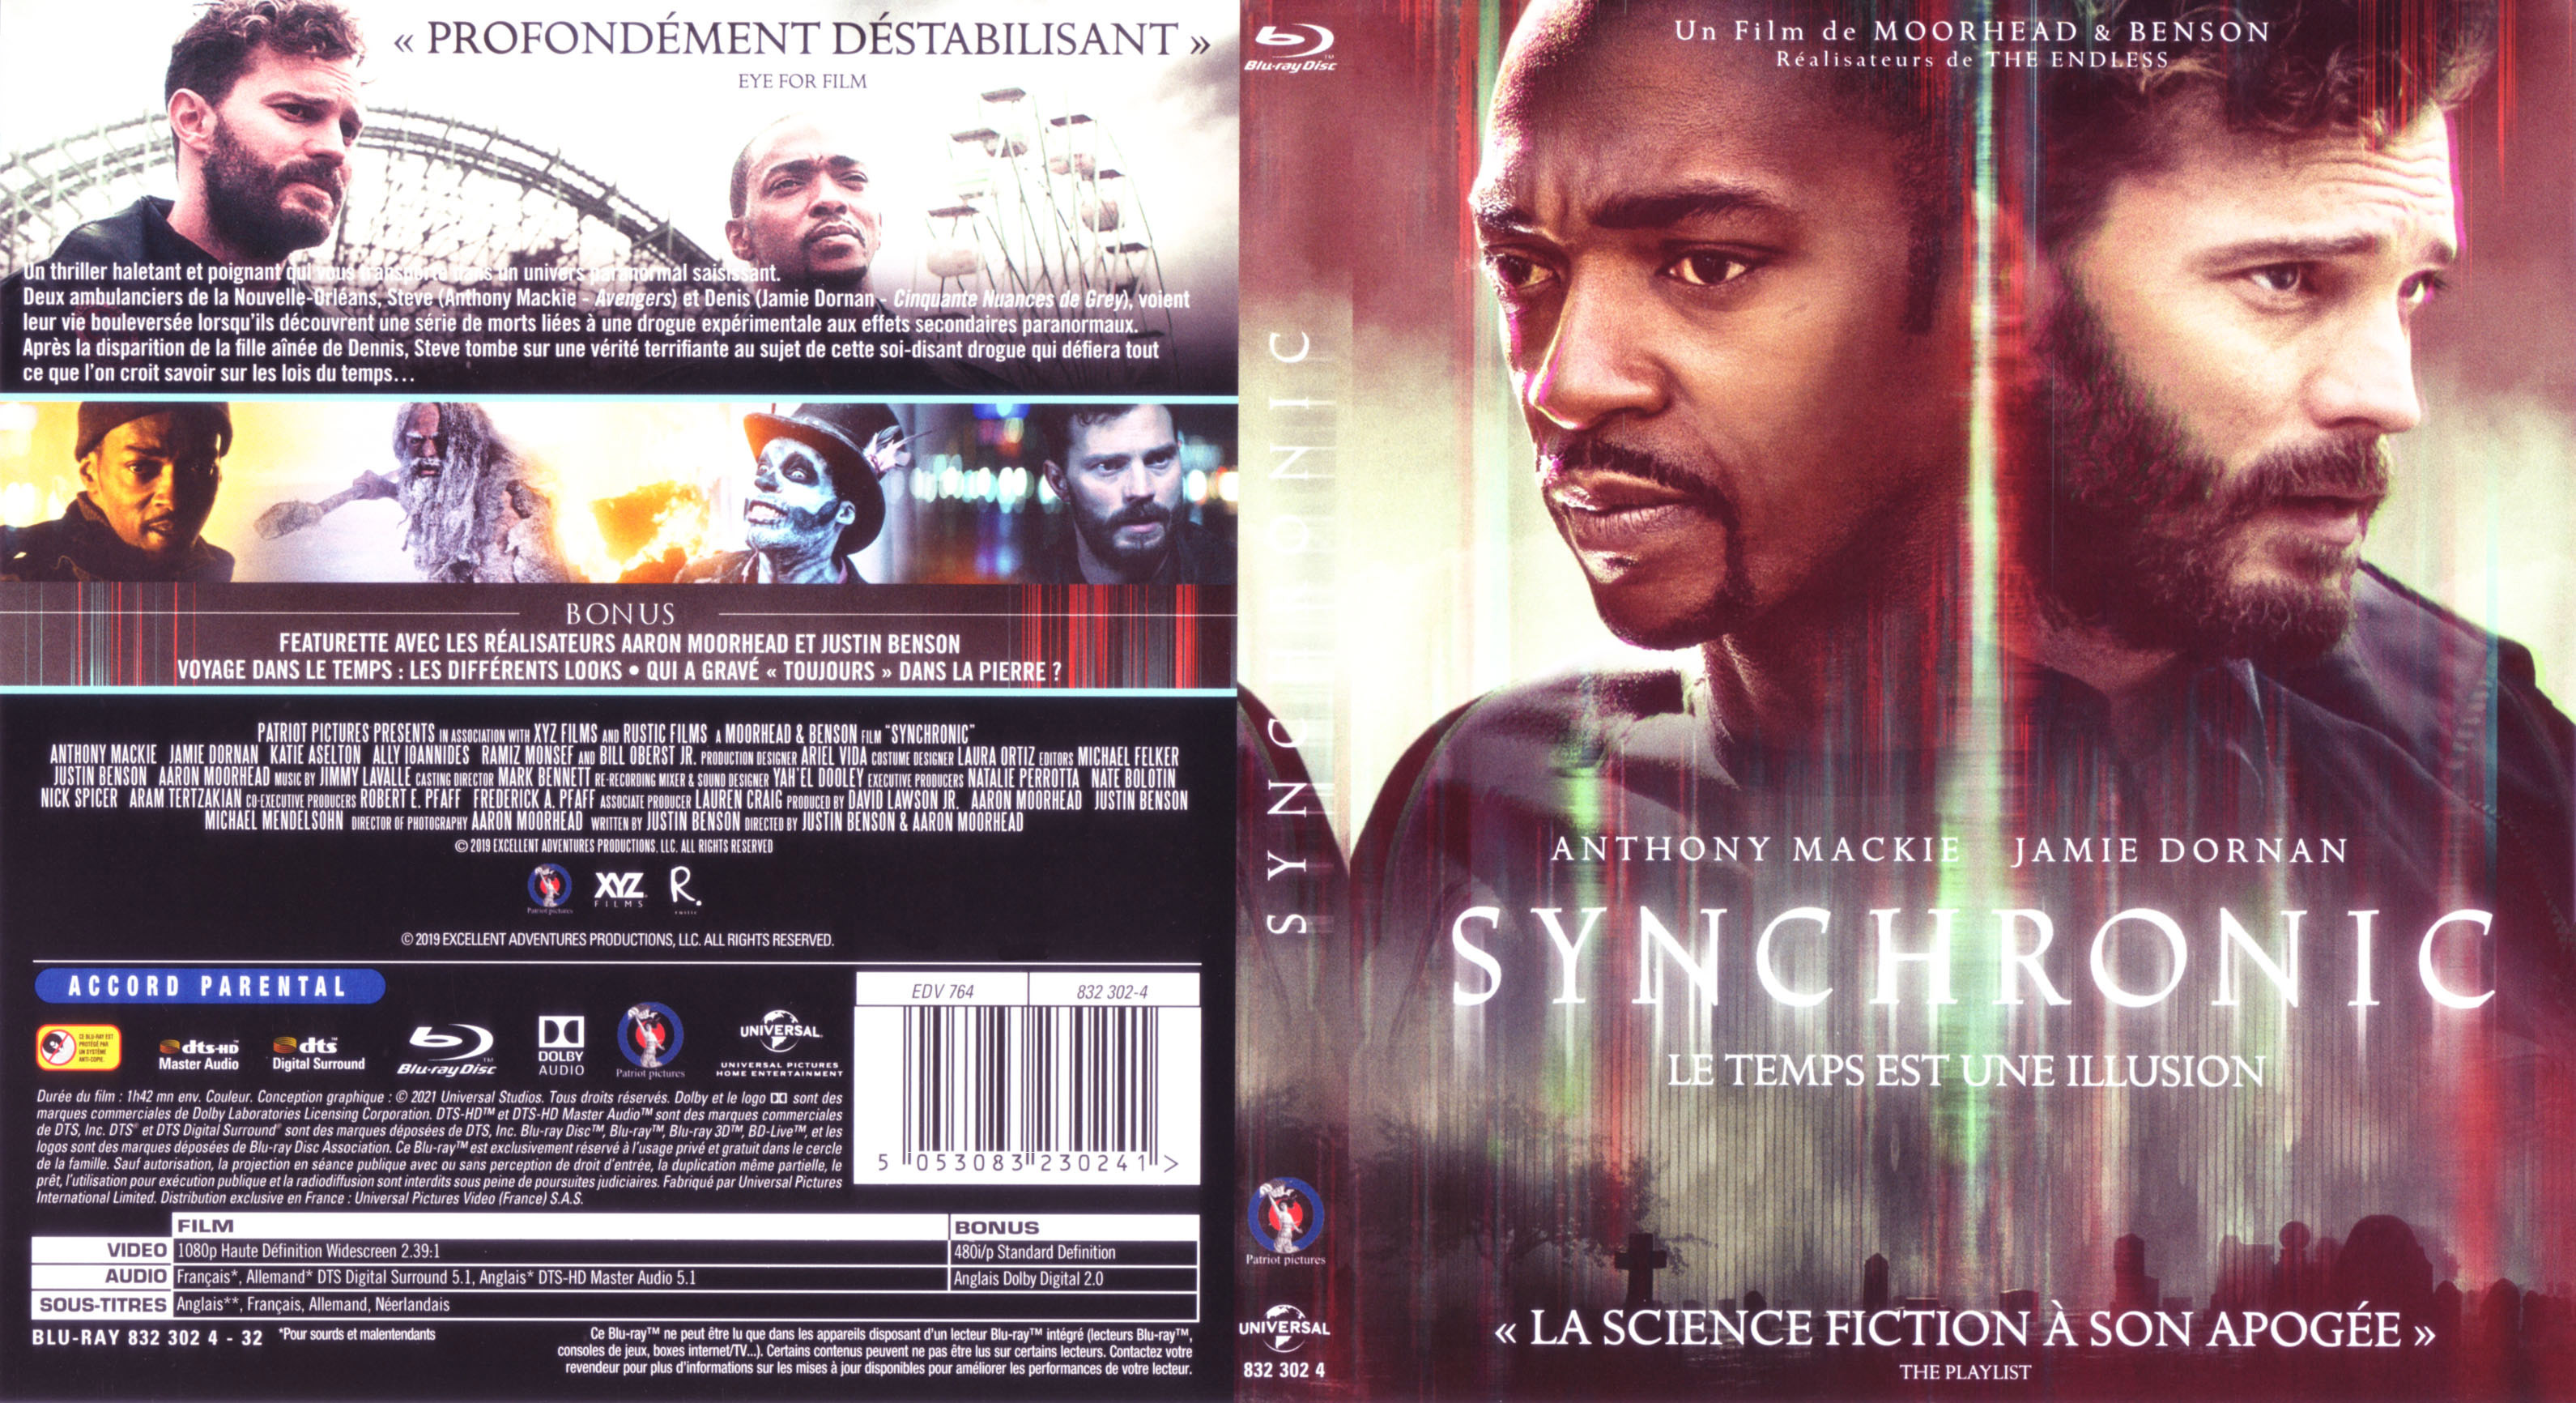 Jaquette DVD Synchronic (BLU-RAY)